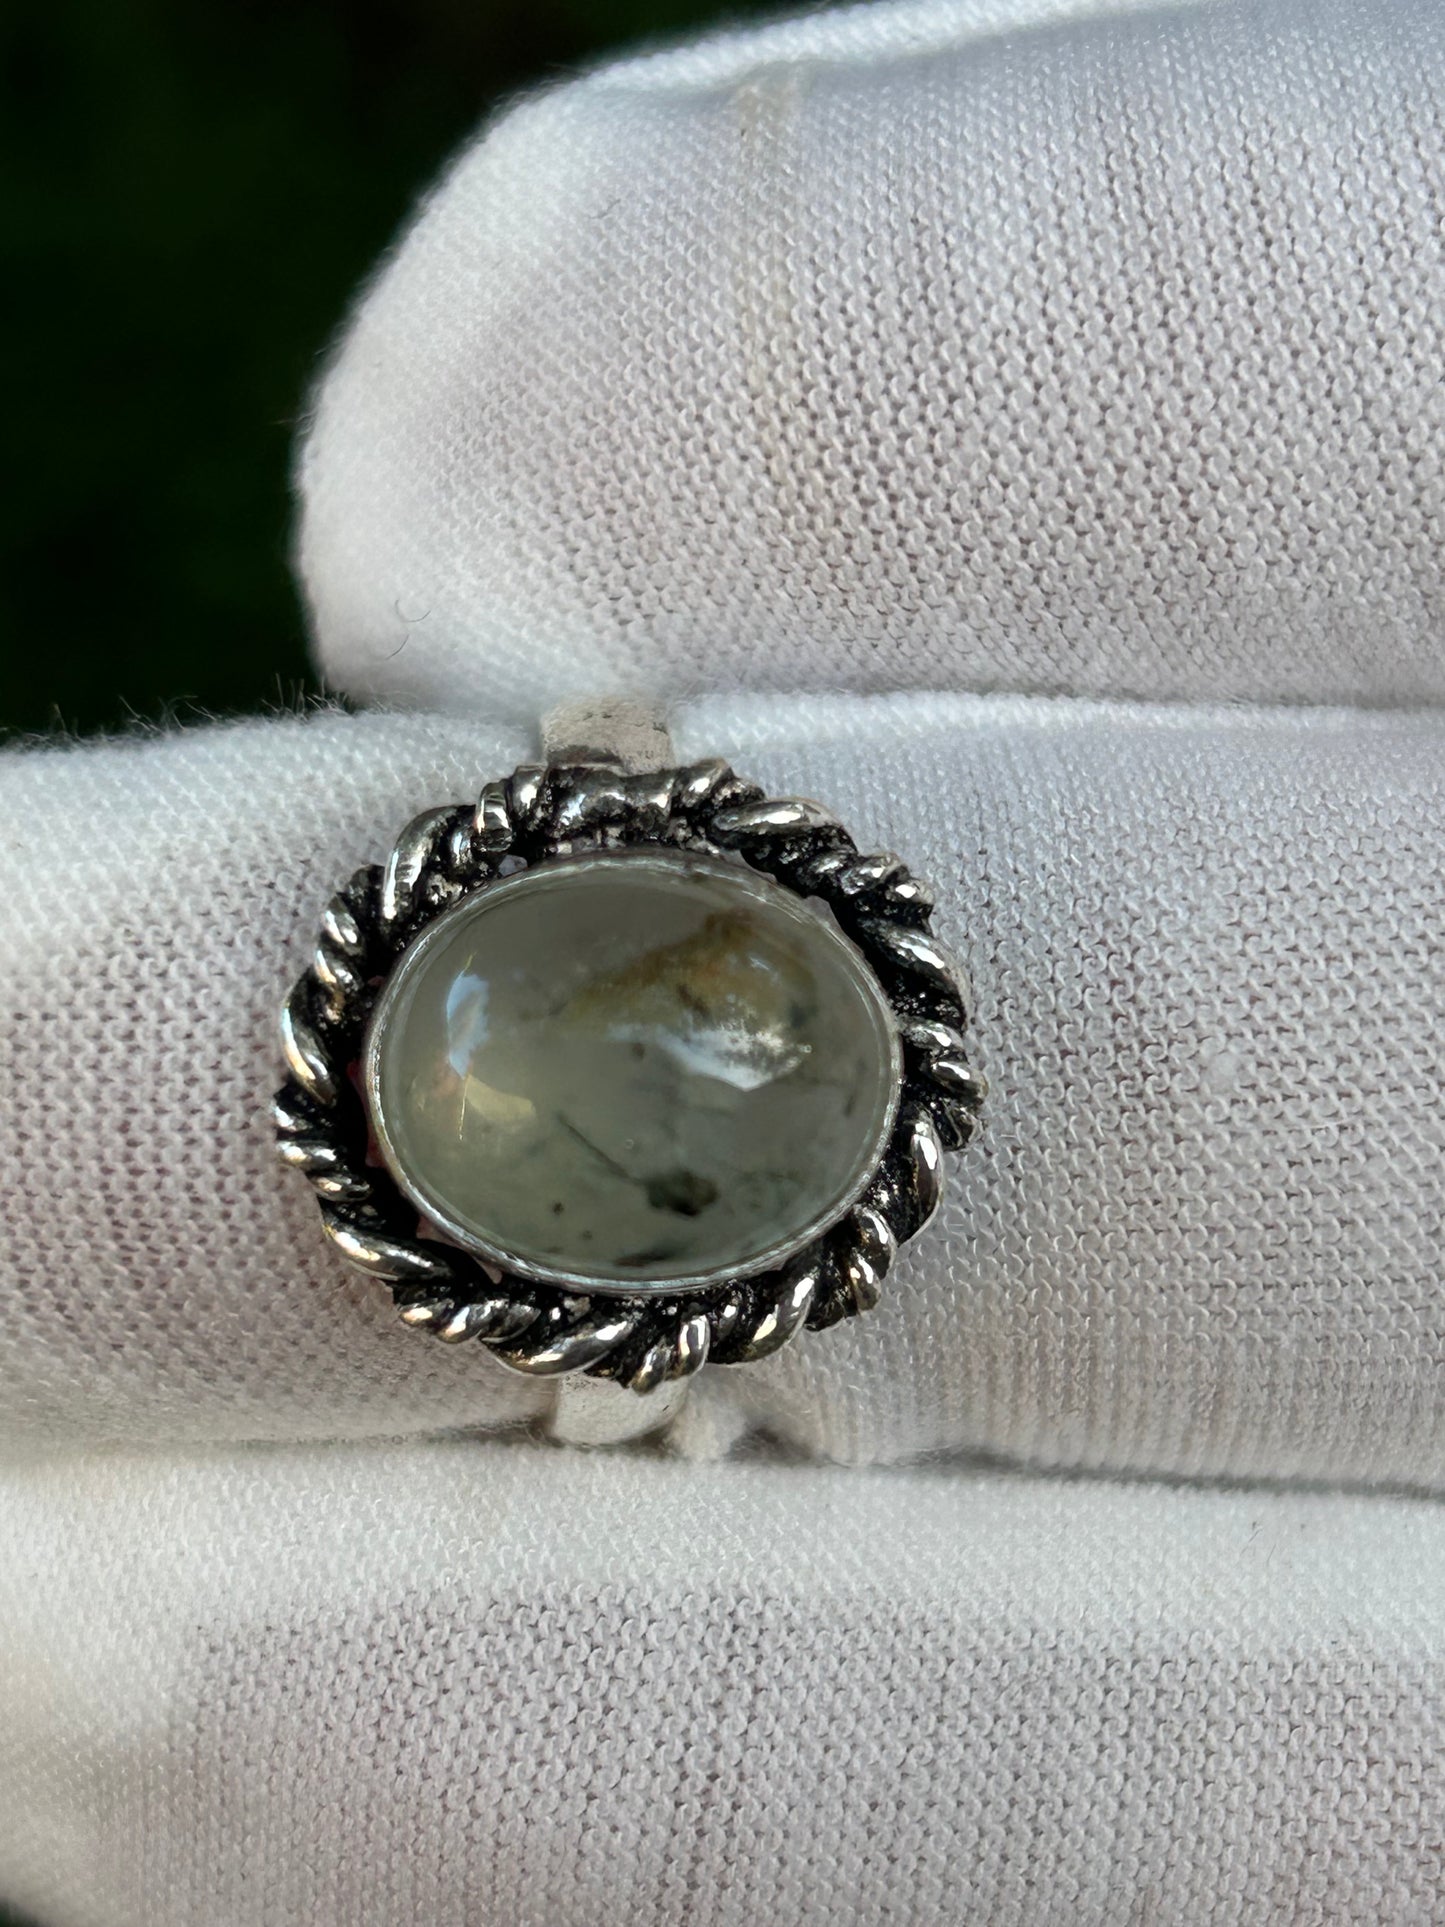 Oval Prehnite adjustable ring in antique silver setting